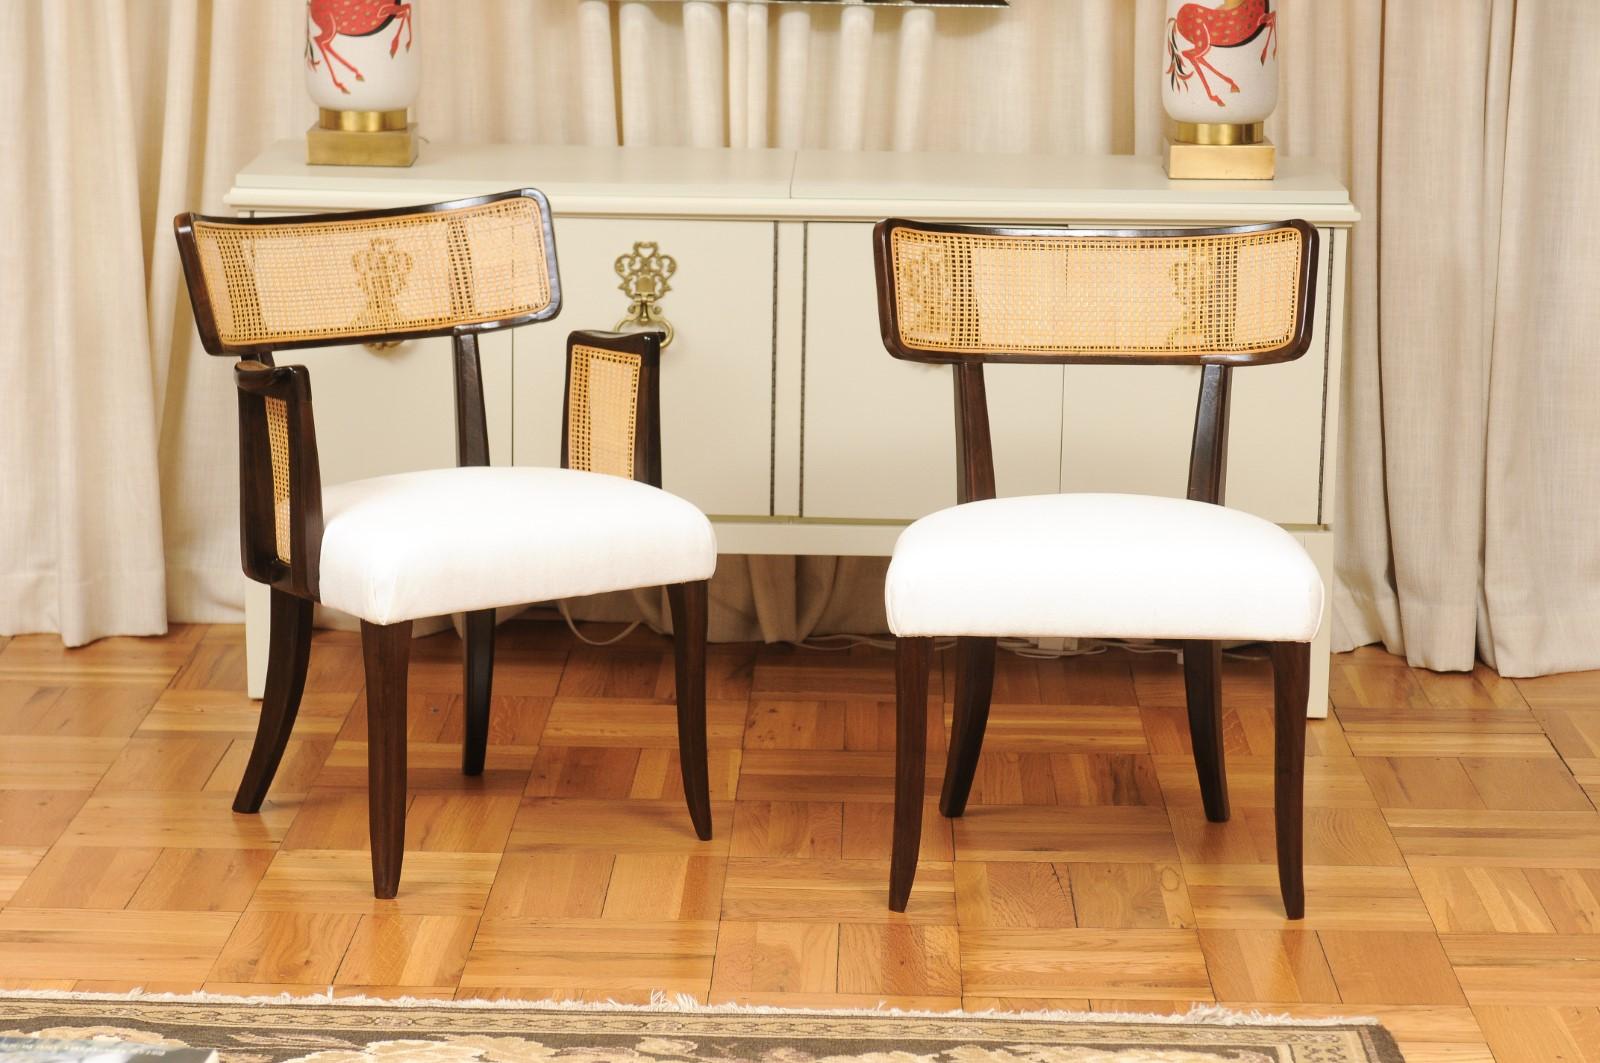 These magnificent dining chairs are shipped as professionally photographed and described in the listing narrative, completely installation ready. Expert custom upholstery service is available.

The rarest of the rare, an exceptional, meticulously